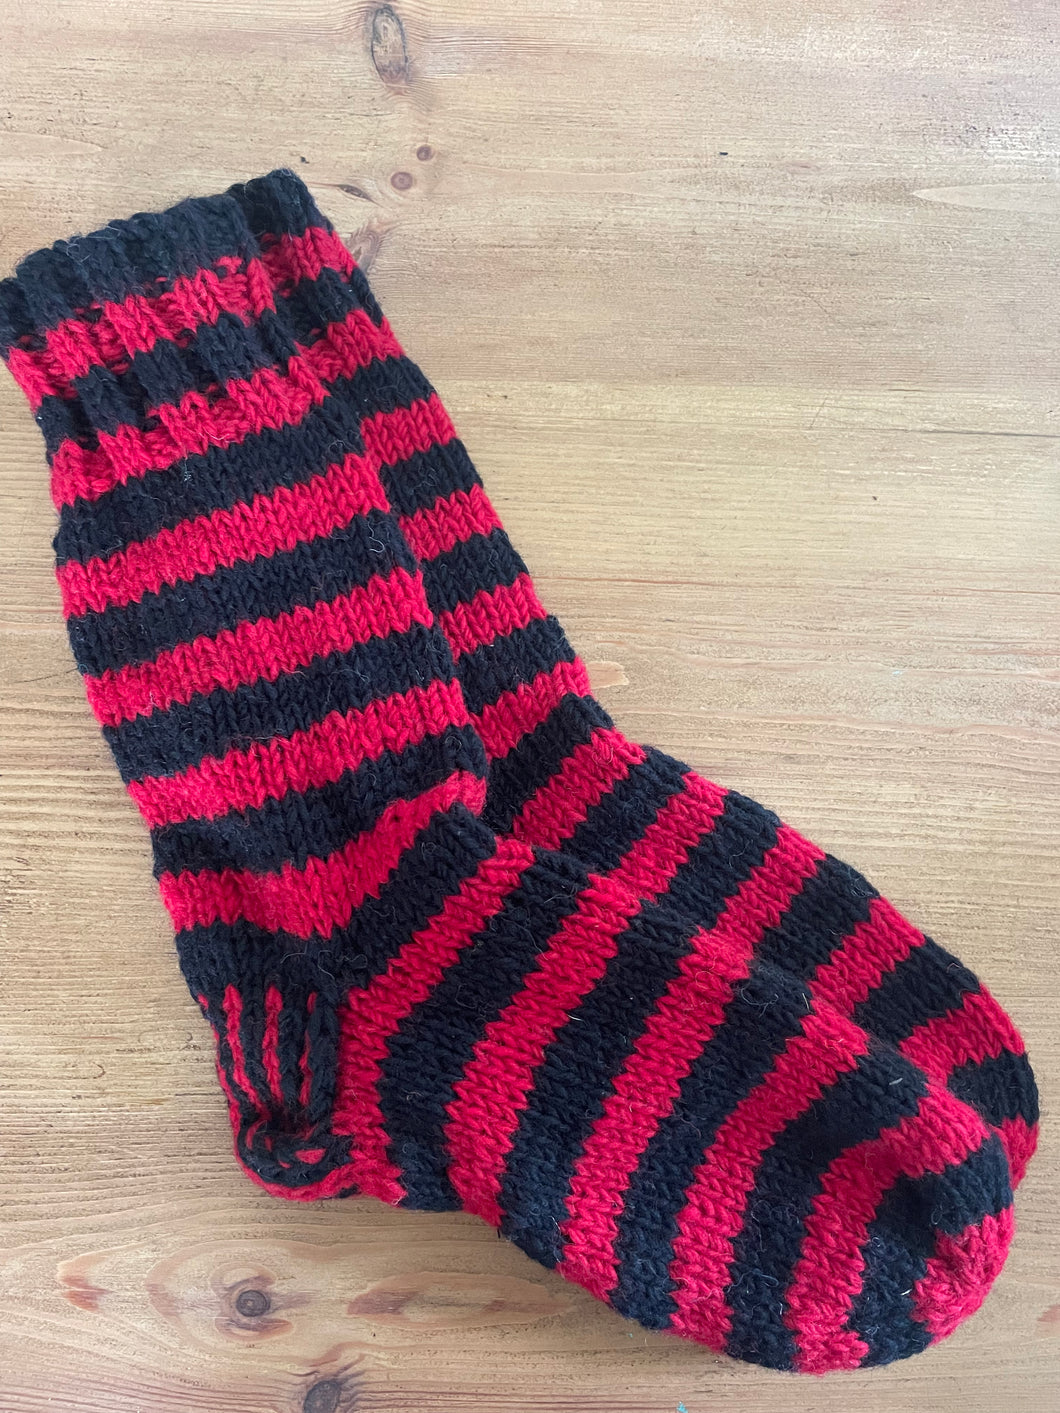 New! Buy now from Emma's Emporium online shop. Super bright, colourful and warm stripe wool with fleece lined Nepalese socks; the perfect winter warming Christmas gift!